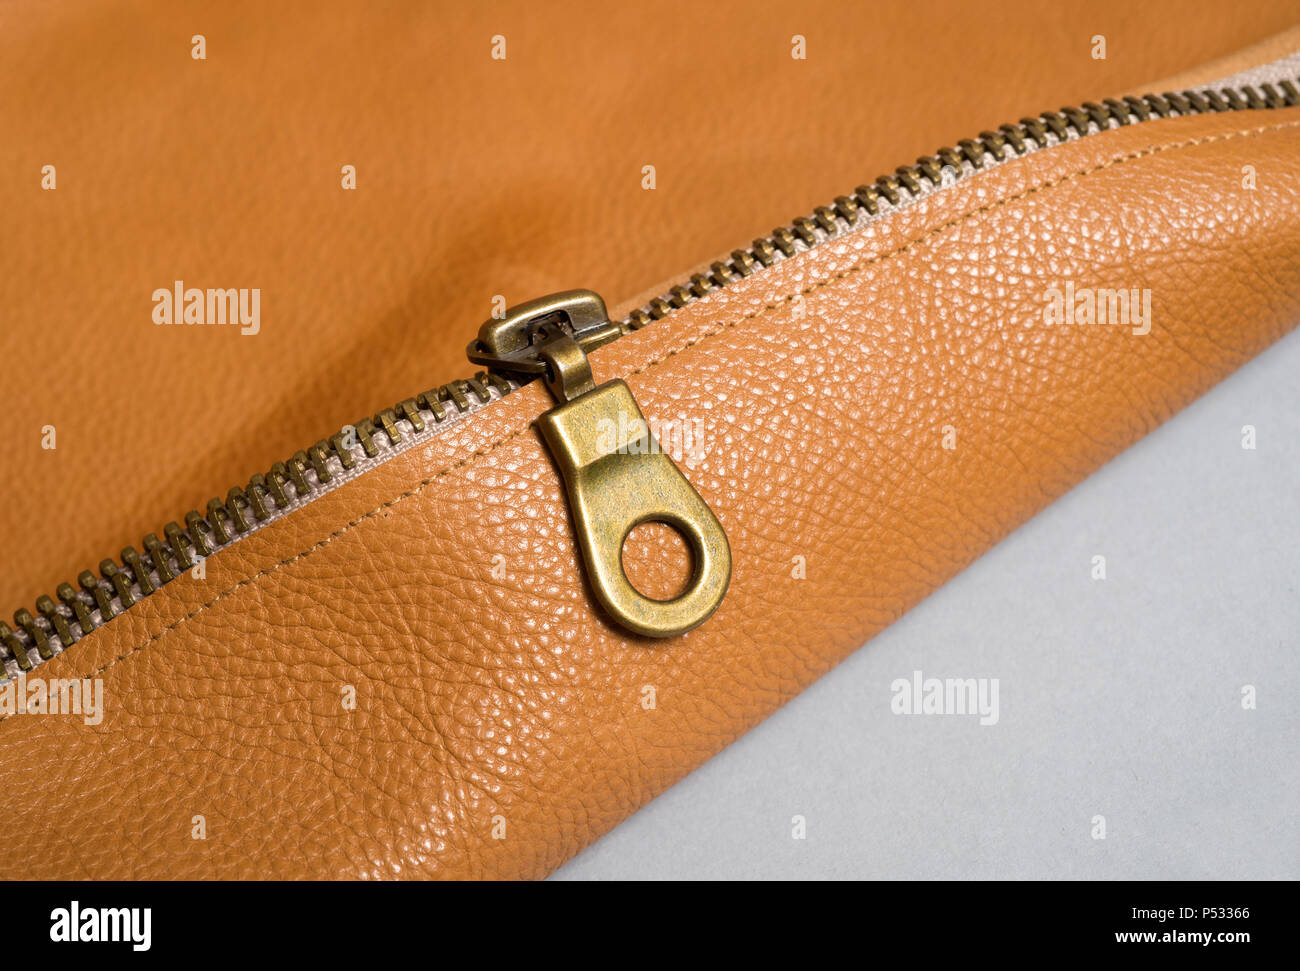 Brown leather bag with zipper. Stock Photo